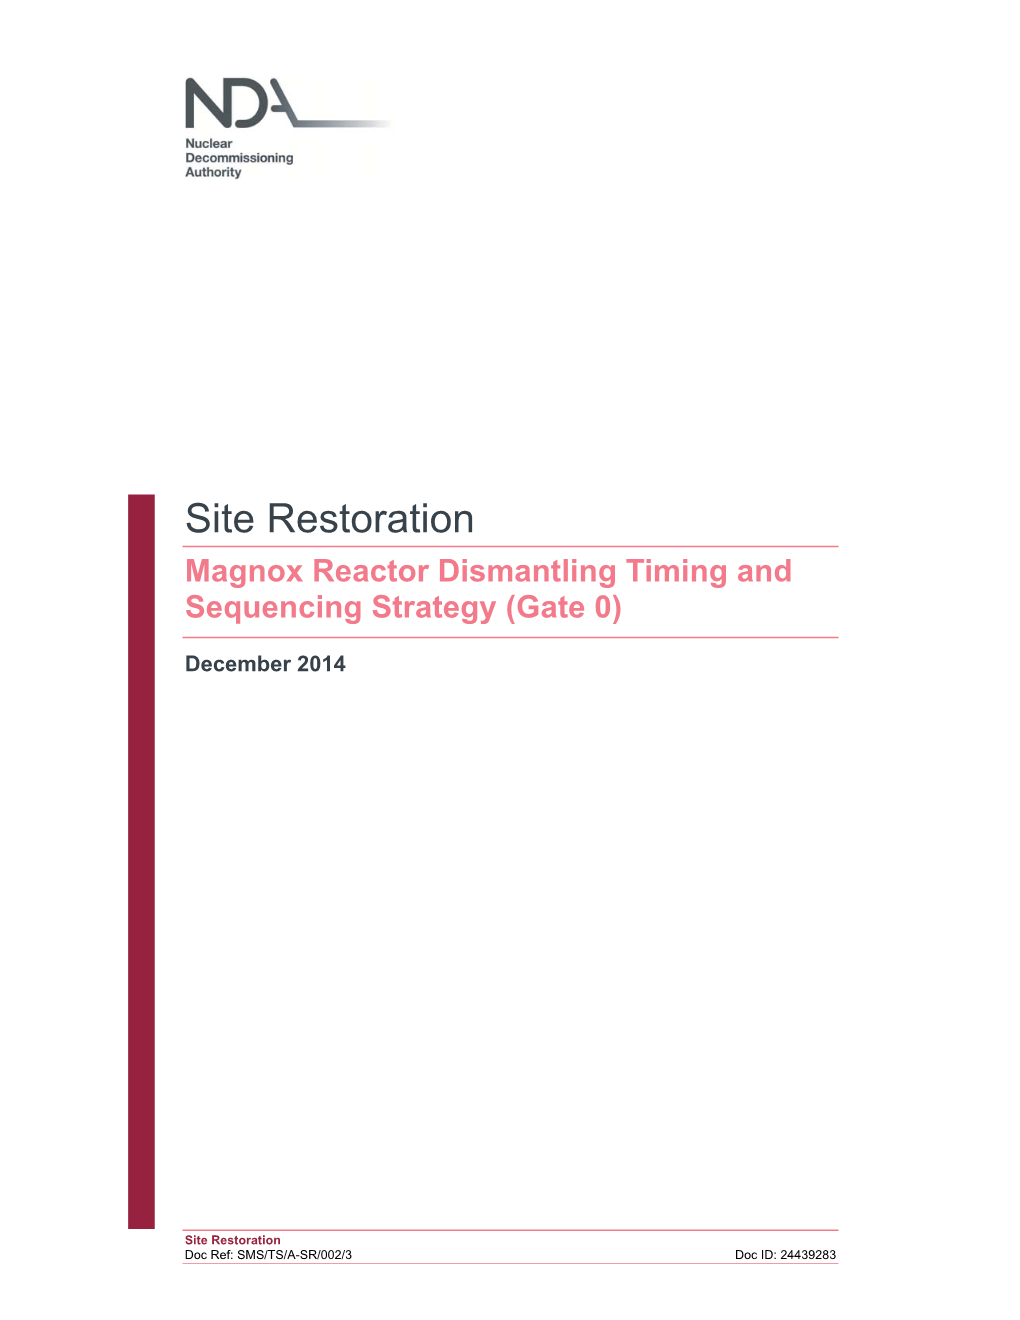 Magnox Reactor Dismantling Timing and Sequencing Strategy (Gate 0)